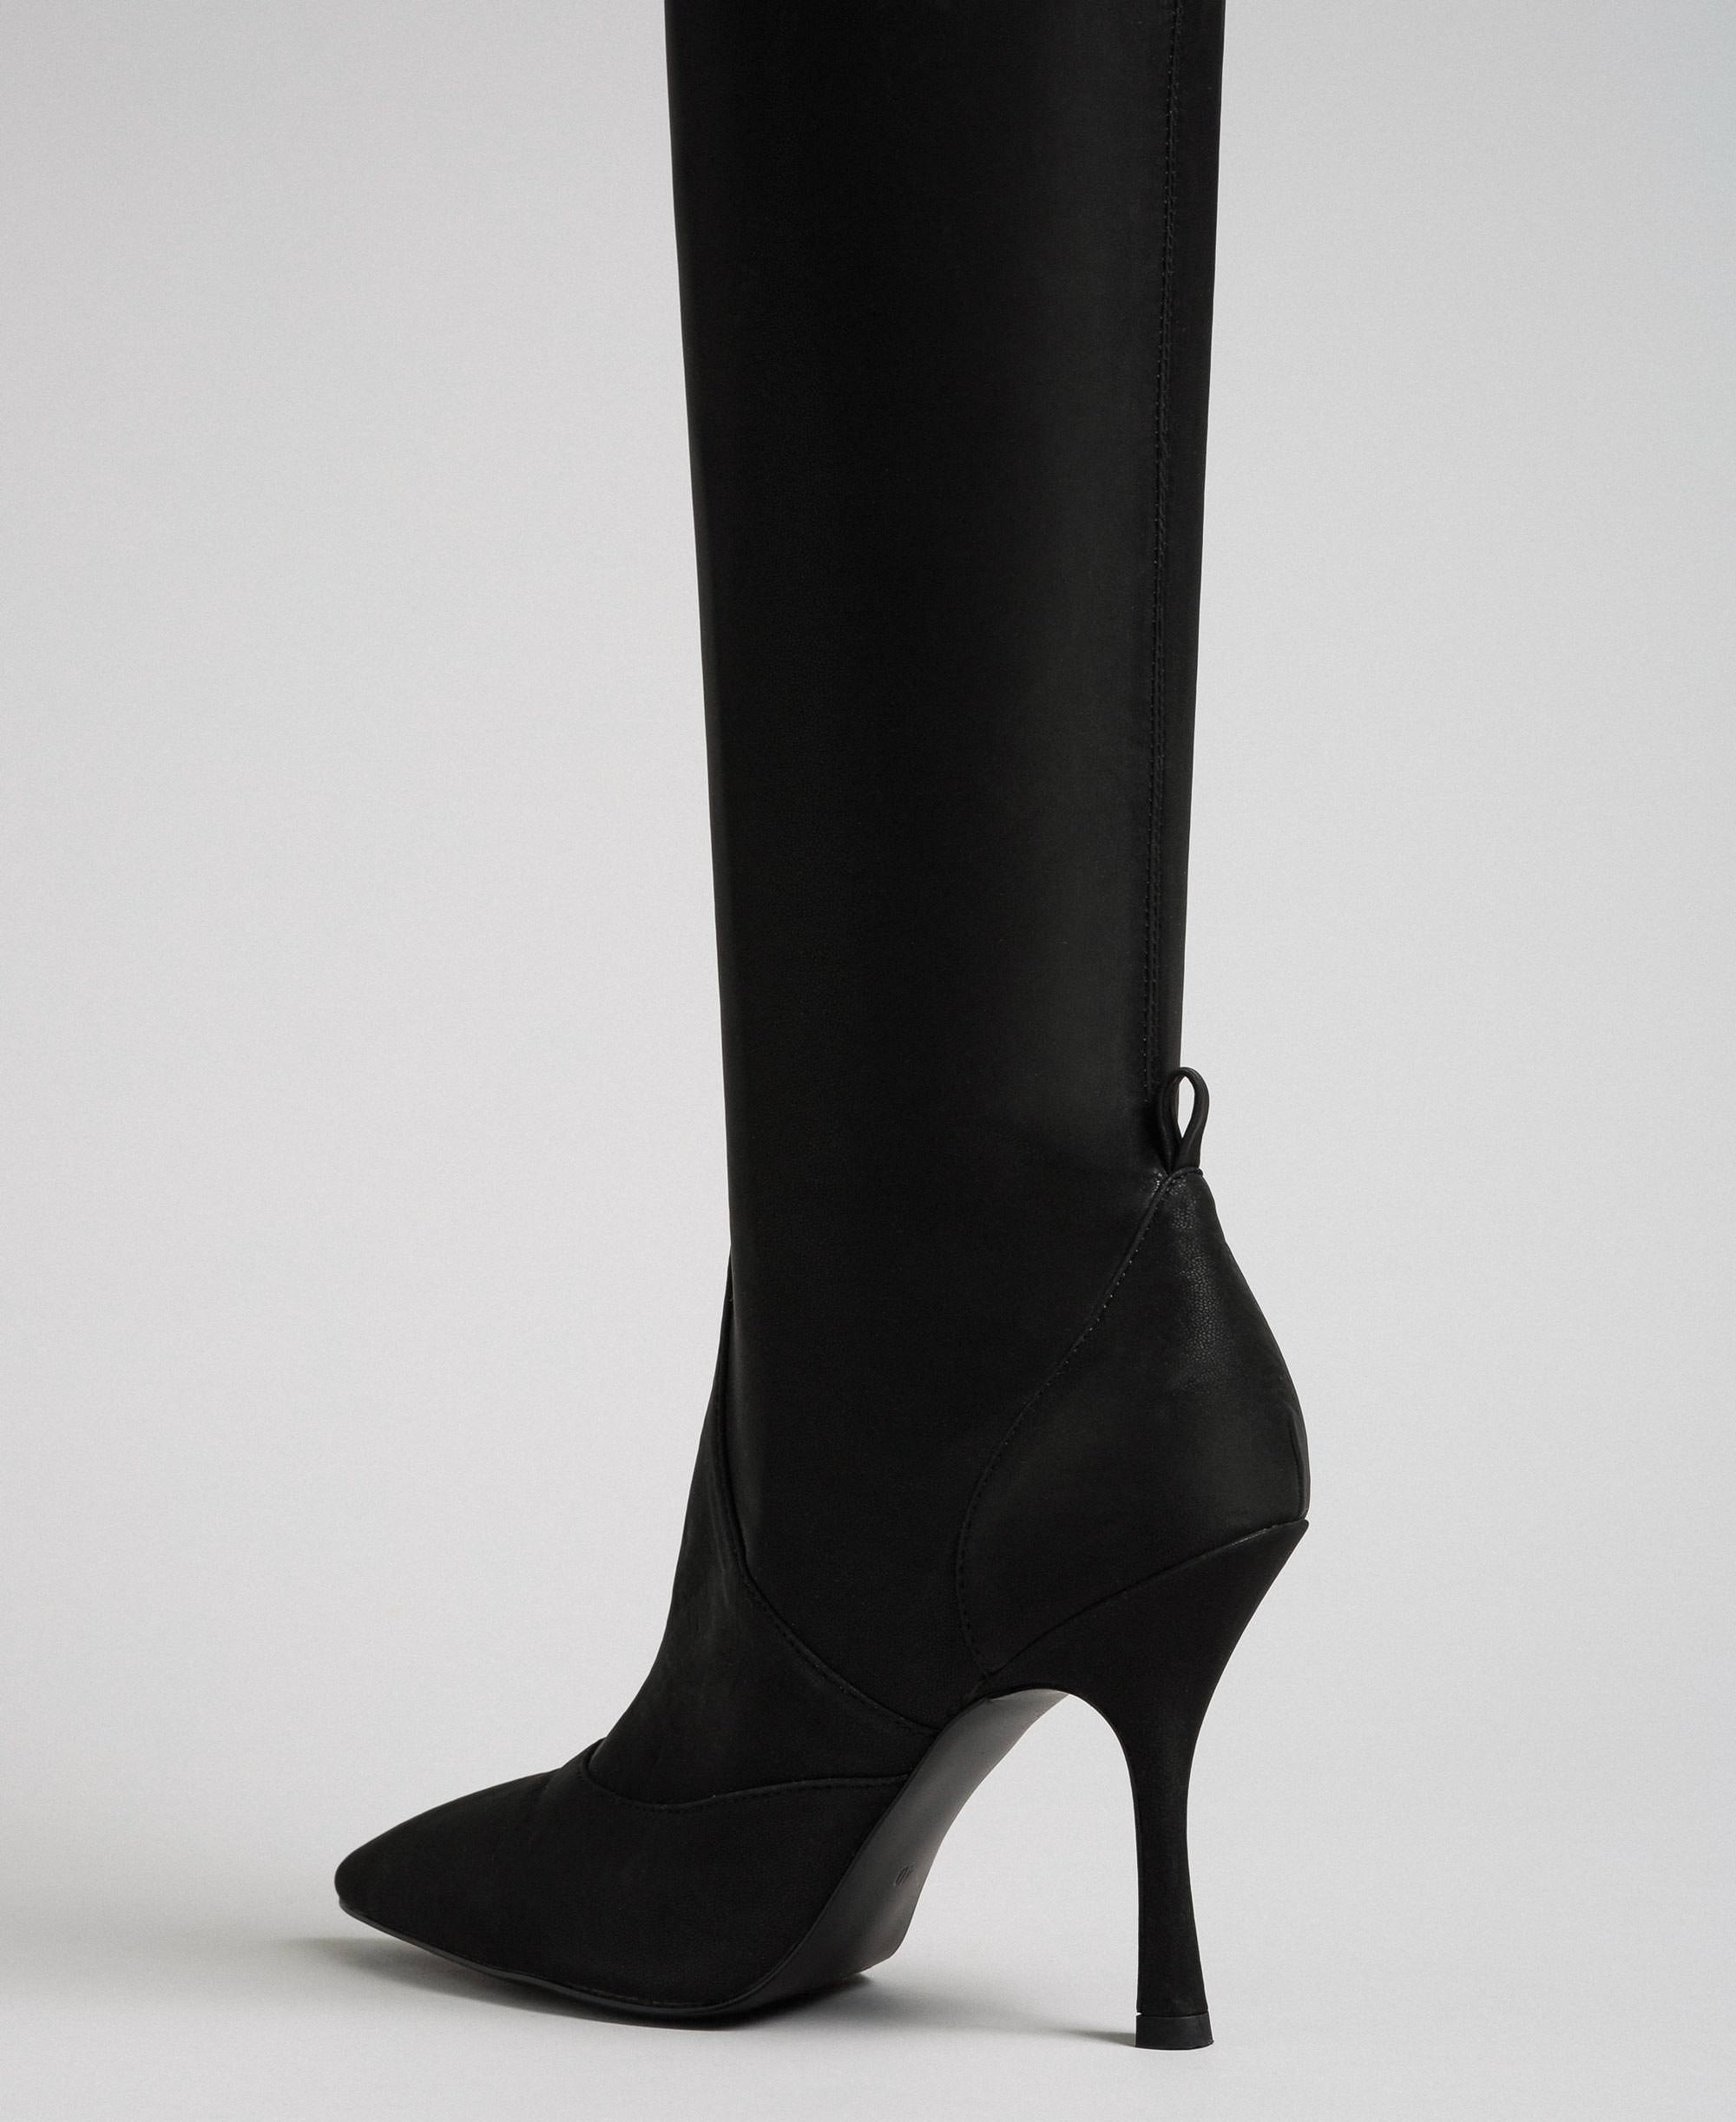 Thigh high boots with stiletto heel 